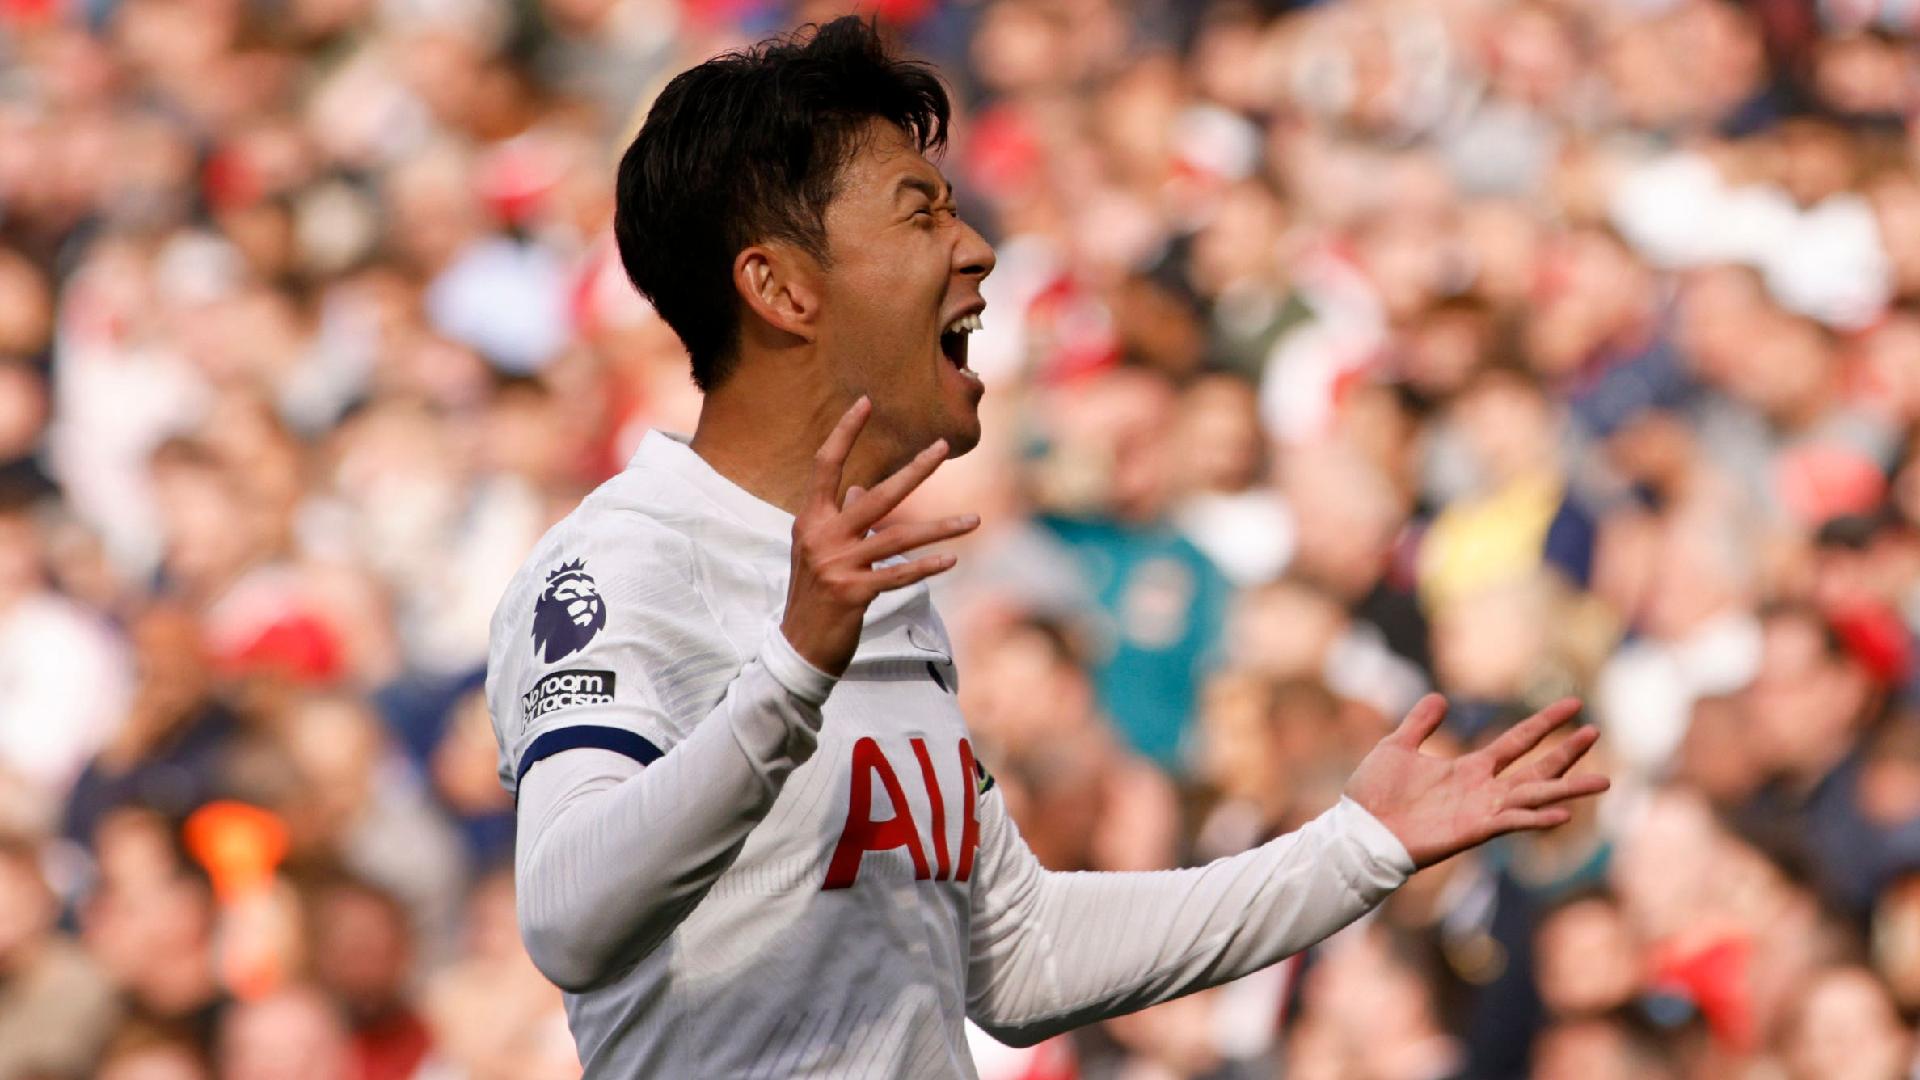 Son Heung-min at the double as Tottenham hold Arsenal in north London derby